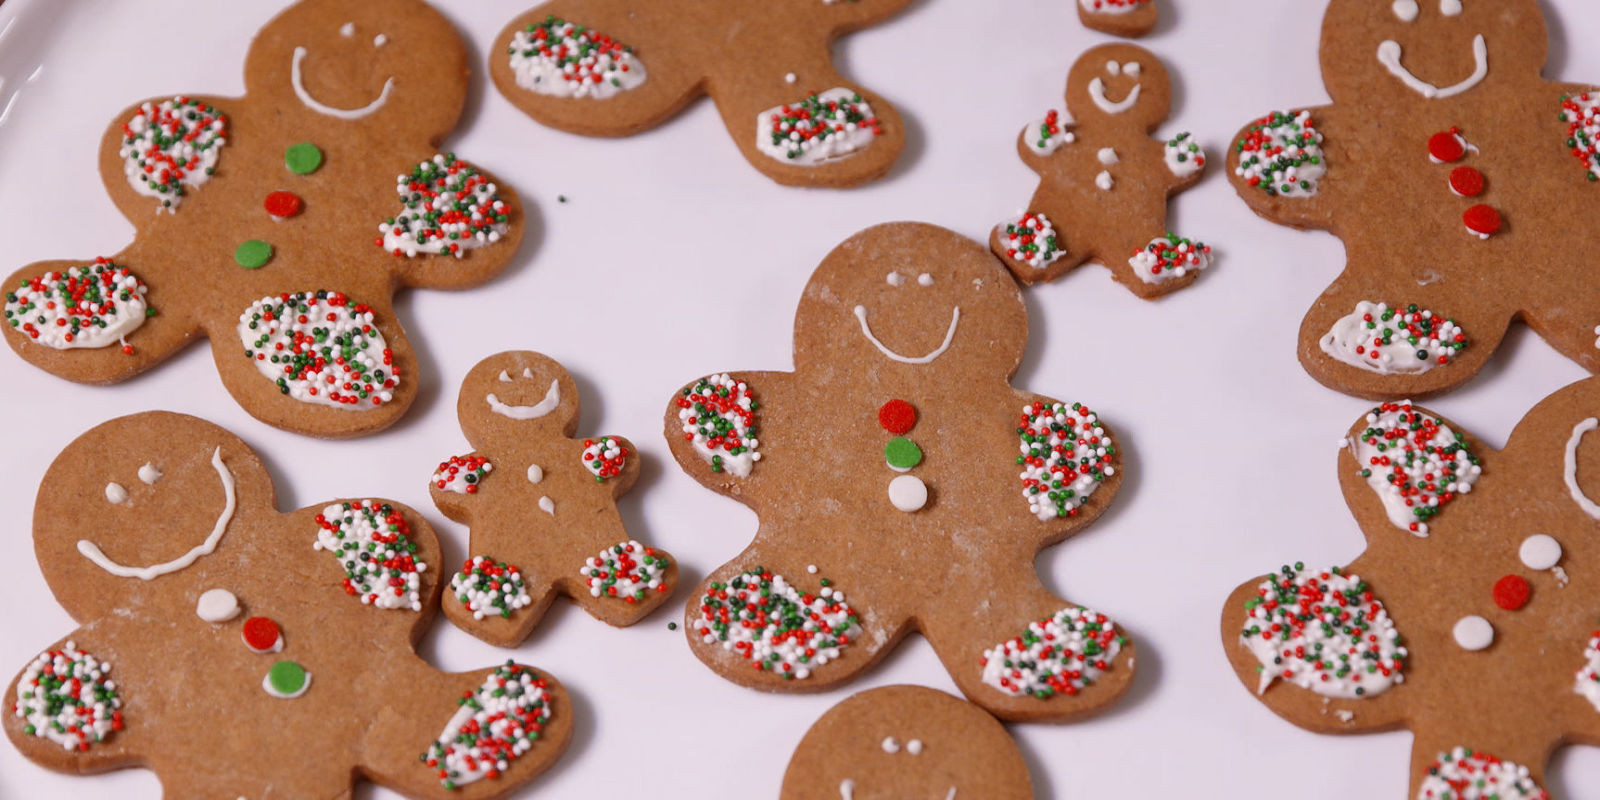 Delish Christmas Cookies
 17 Easy Gingerbread Cookie Recipes How to Make